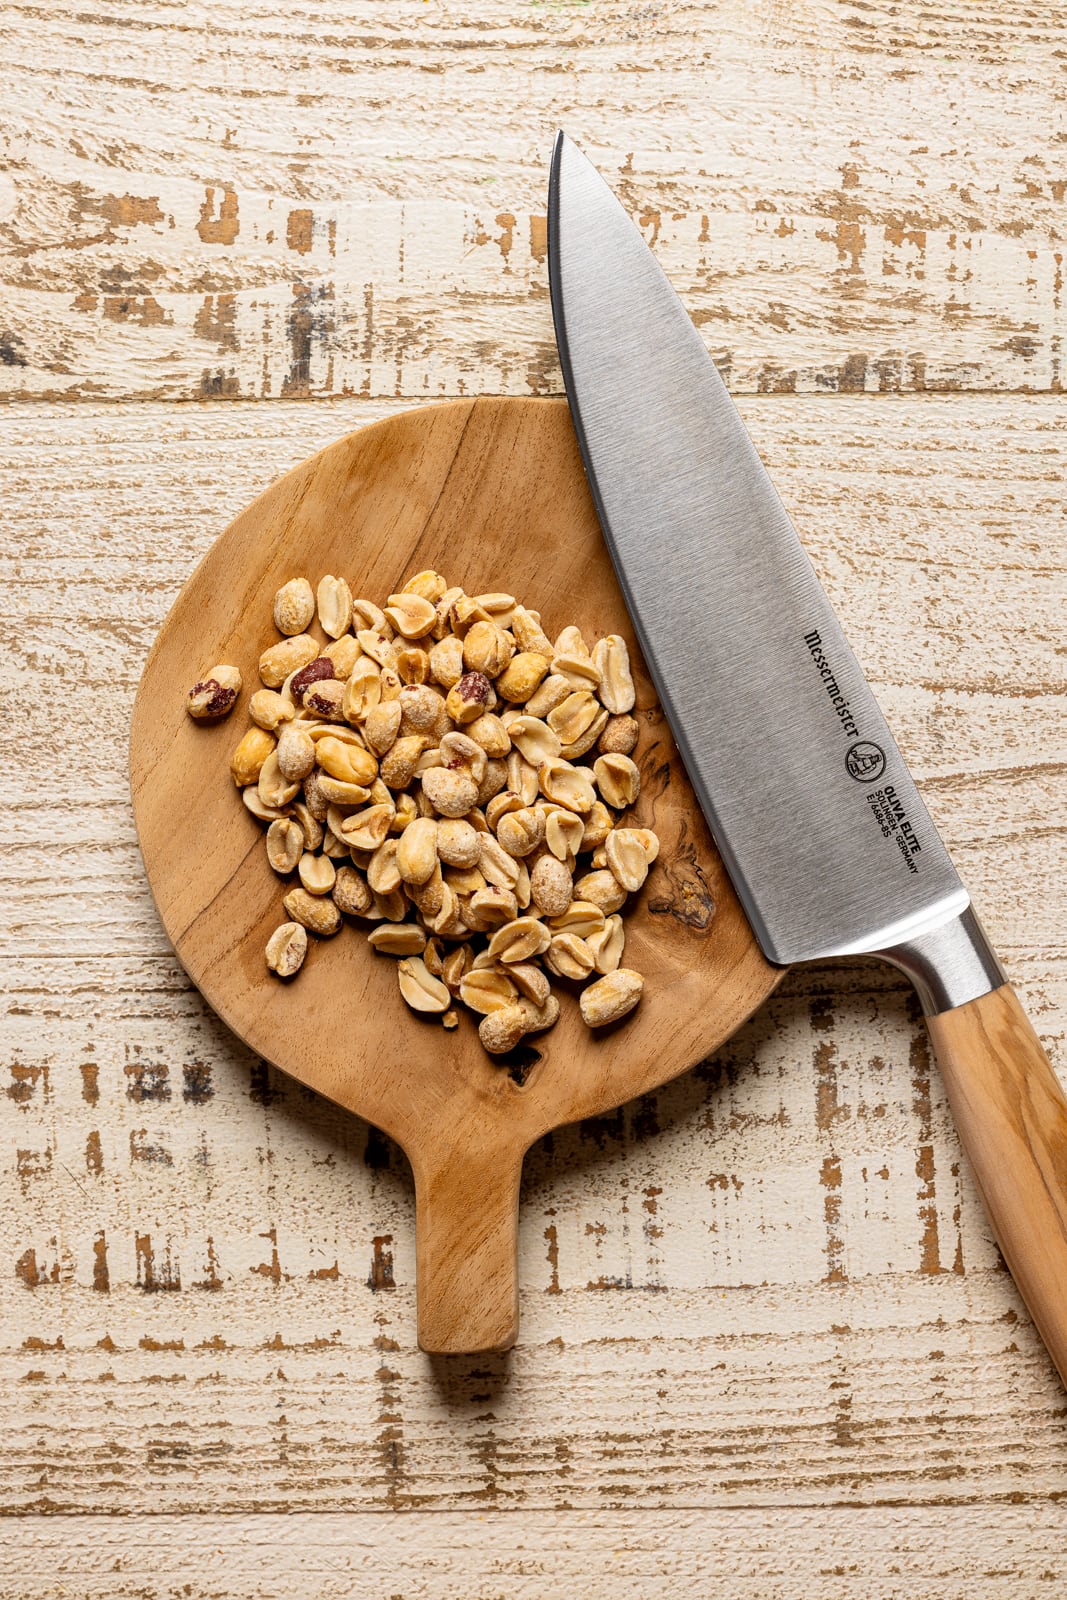 Chopped peanuts on a cutting board with a knife.